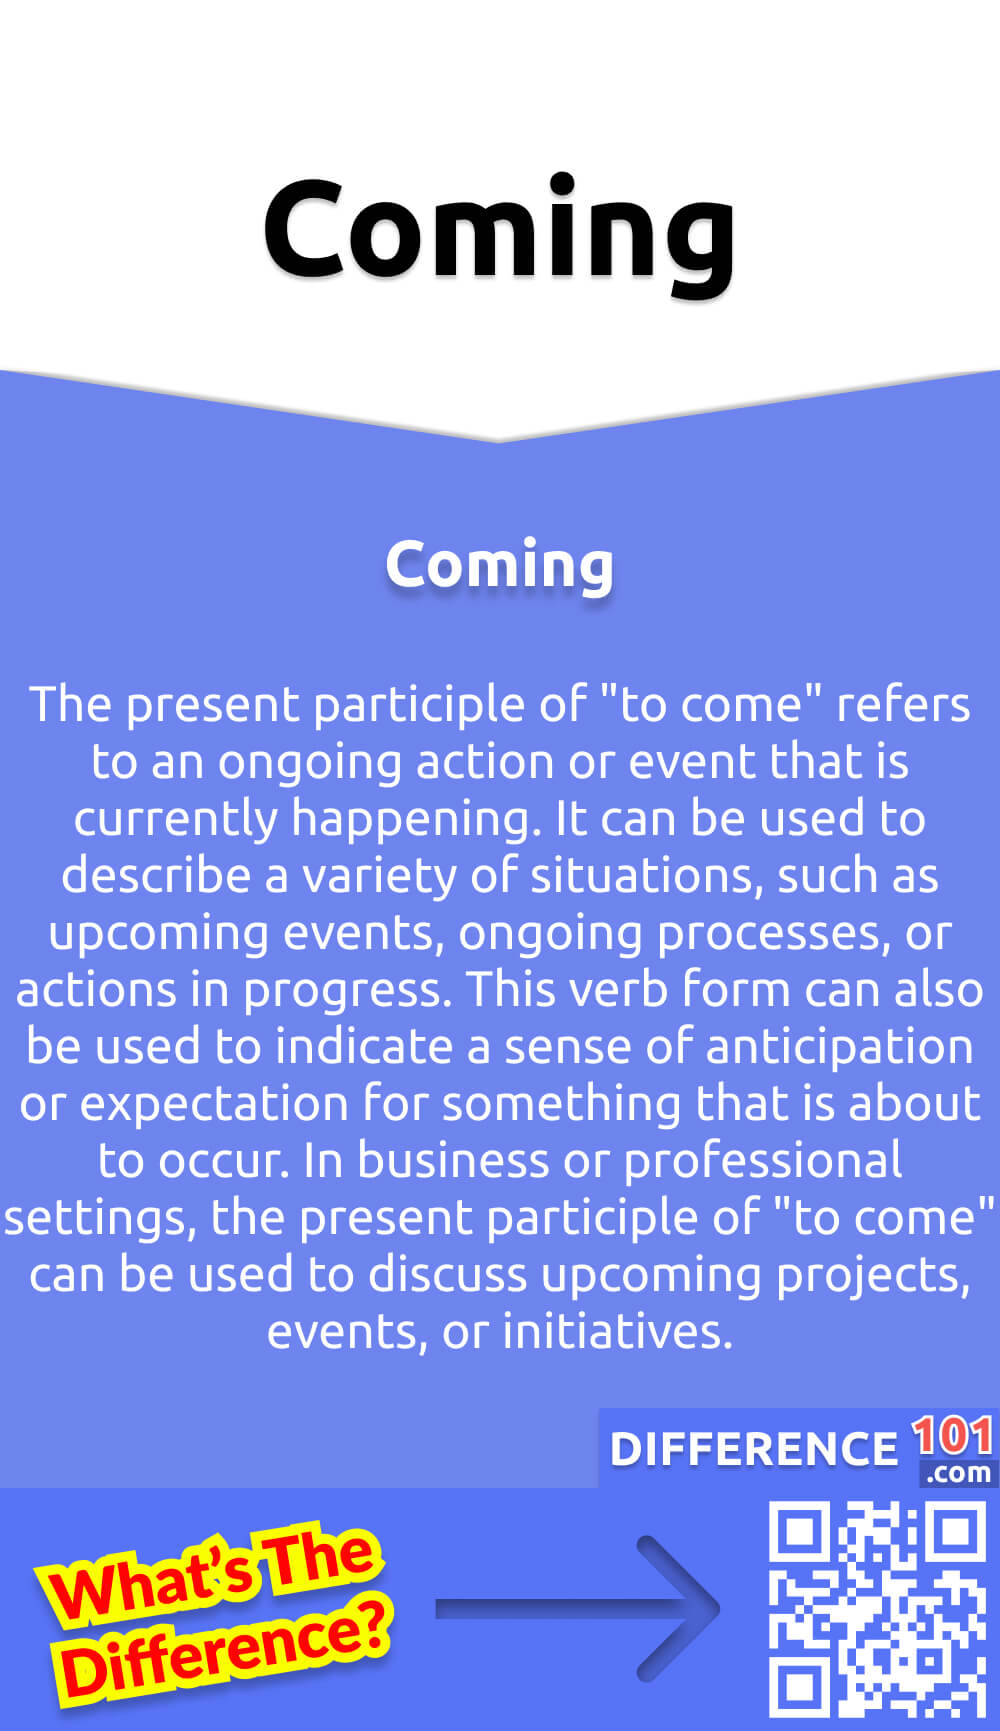 What Is Coming? The present participle of "to come" refers to an ongoing action or event that is currently happening. It can be used to describe a variety of situations, such as upcoming events, ongoing processes, or actions in progress. This verb form can also be used to indicate a sense of anticipation or expectation for something that is about to occur. In business or professional settings, the present participle of "to come" can be used to discuss upcoming projects, events, or initiatives.